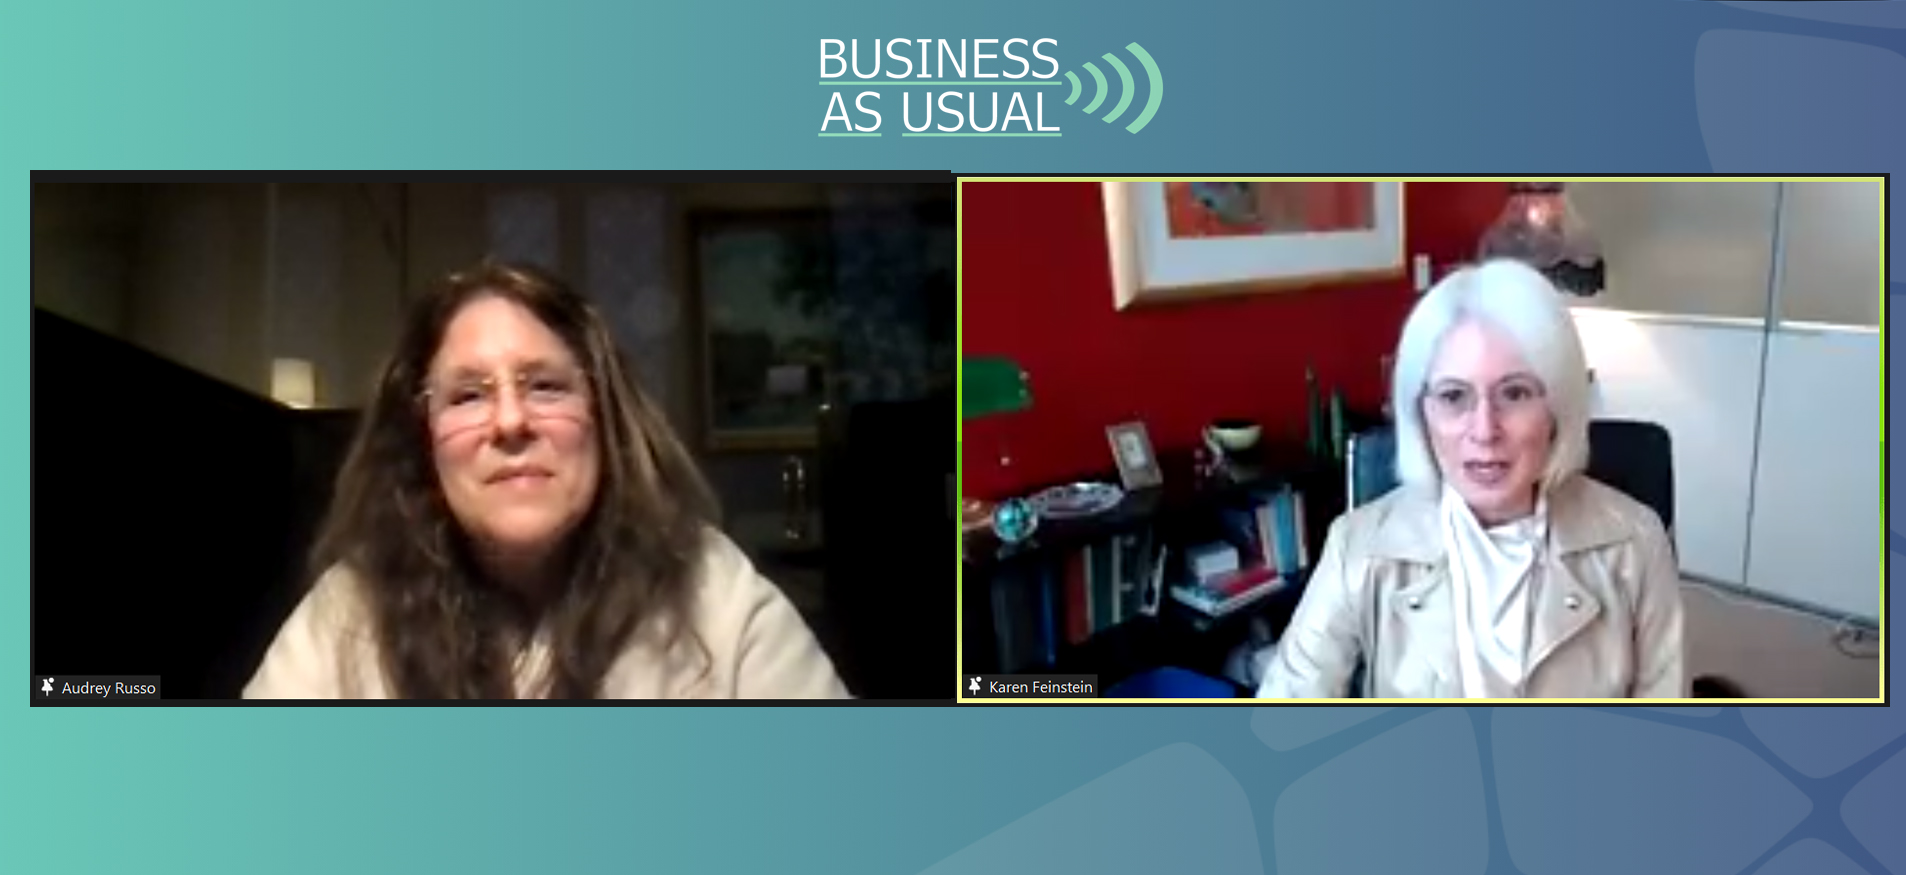 Audrey Russo and Karen Feinstein discuss JHF’s work during the Business as Usual webinar.